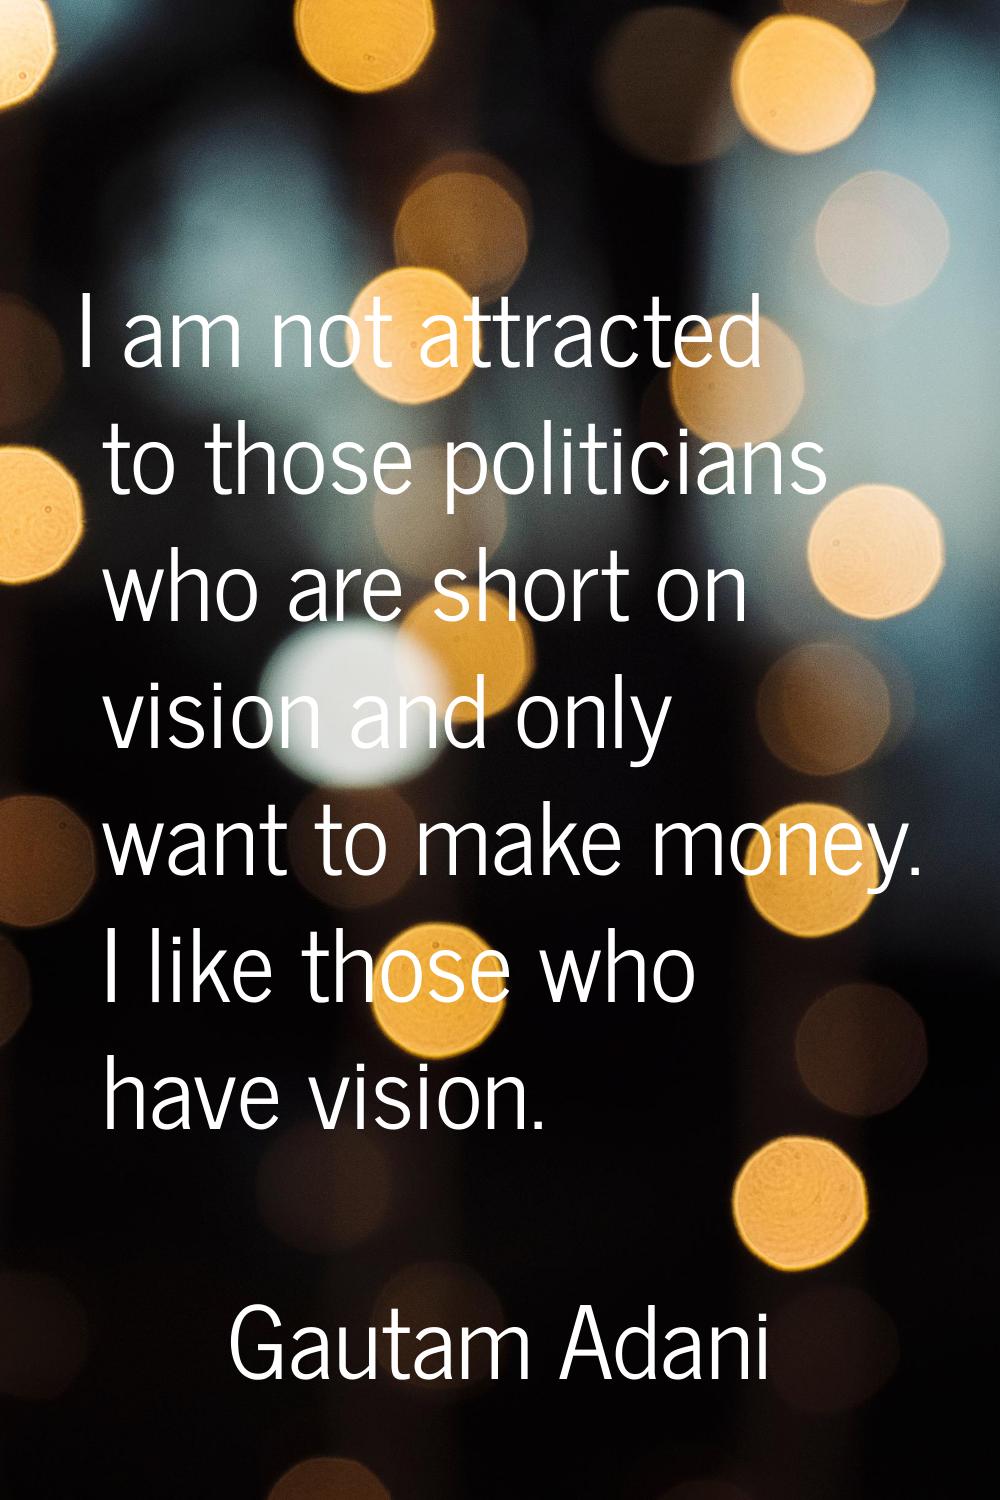 I am not attracted to those politicians who are short on vision and only want to make money. I like